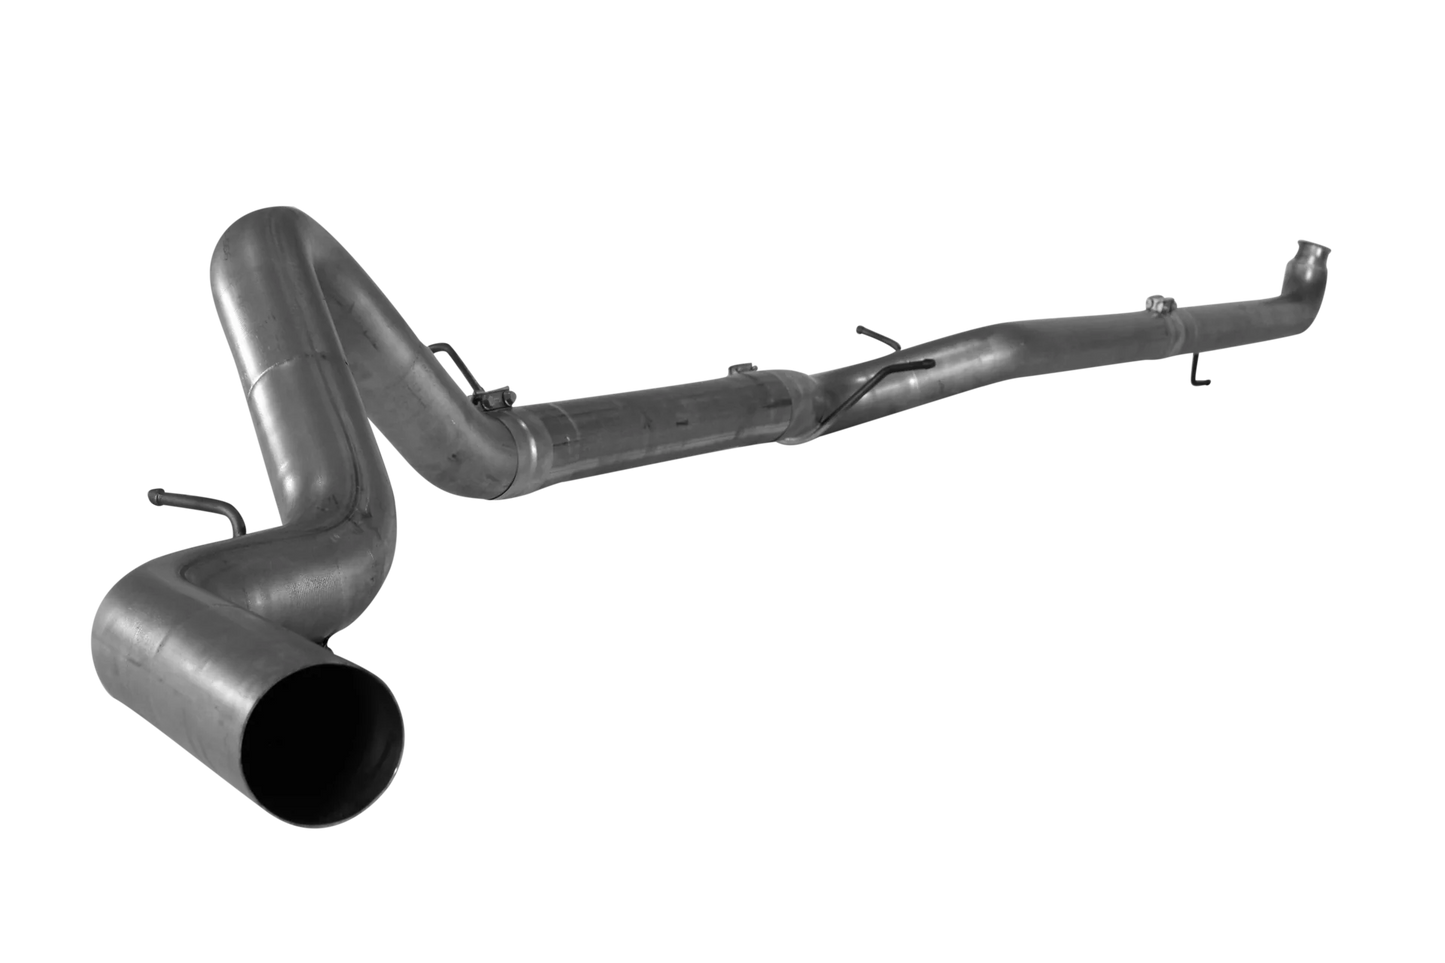 432011 432010 731011 431010 Mel's Manufacturing 4" Downpipe Back Single | 2007.5-2010 GM 2500/3500 6.6L DURAMAX Mels Mfg FloPro Flo-Pro Flo Pro Hell On Wheels Performance Ltd Limited Canadian Owned and Operated Online Diesel Parts Distribution & Wholesale Supply Center in Alberta Canada Shipping Supplying to Alberta British Columbia Sask Saskatchewan Manitoba Ontario Quebec Newfoundland Labrador New Brunswick Nova Scotia Prince Edward Island AB BC SK MB ON QC PQ NS NB NFLD N.L. PEI